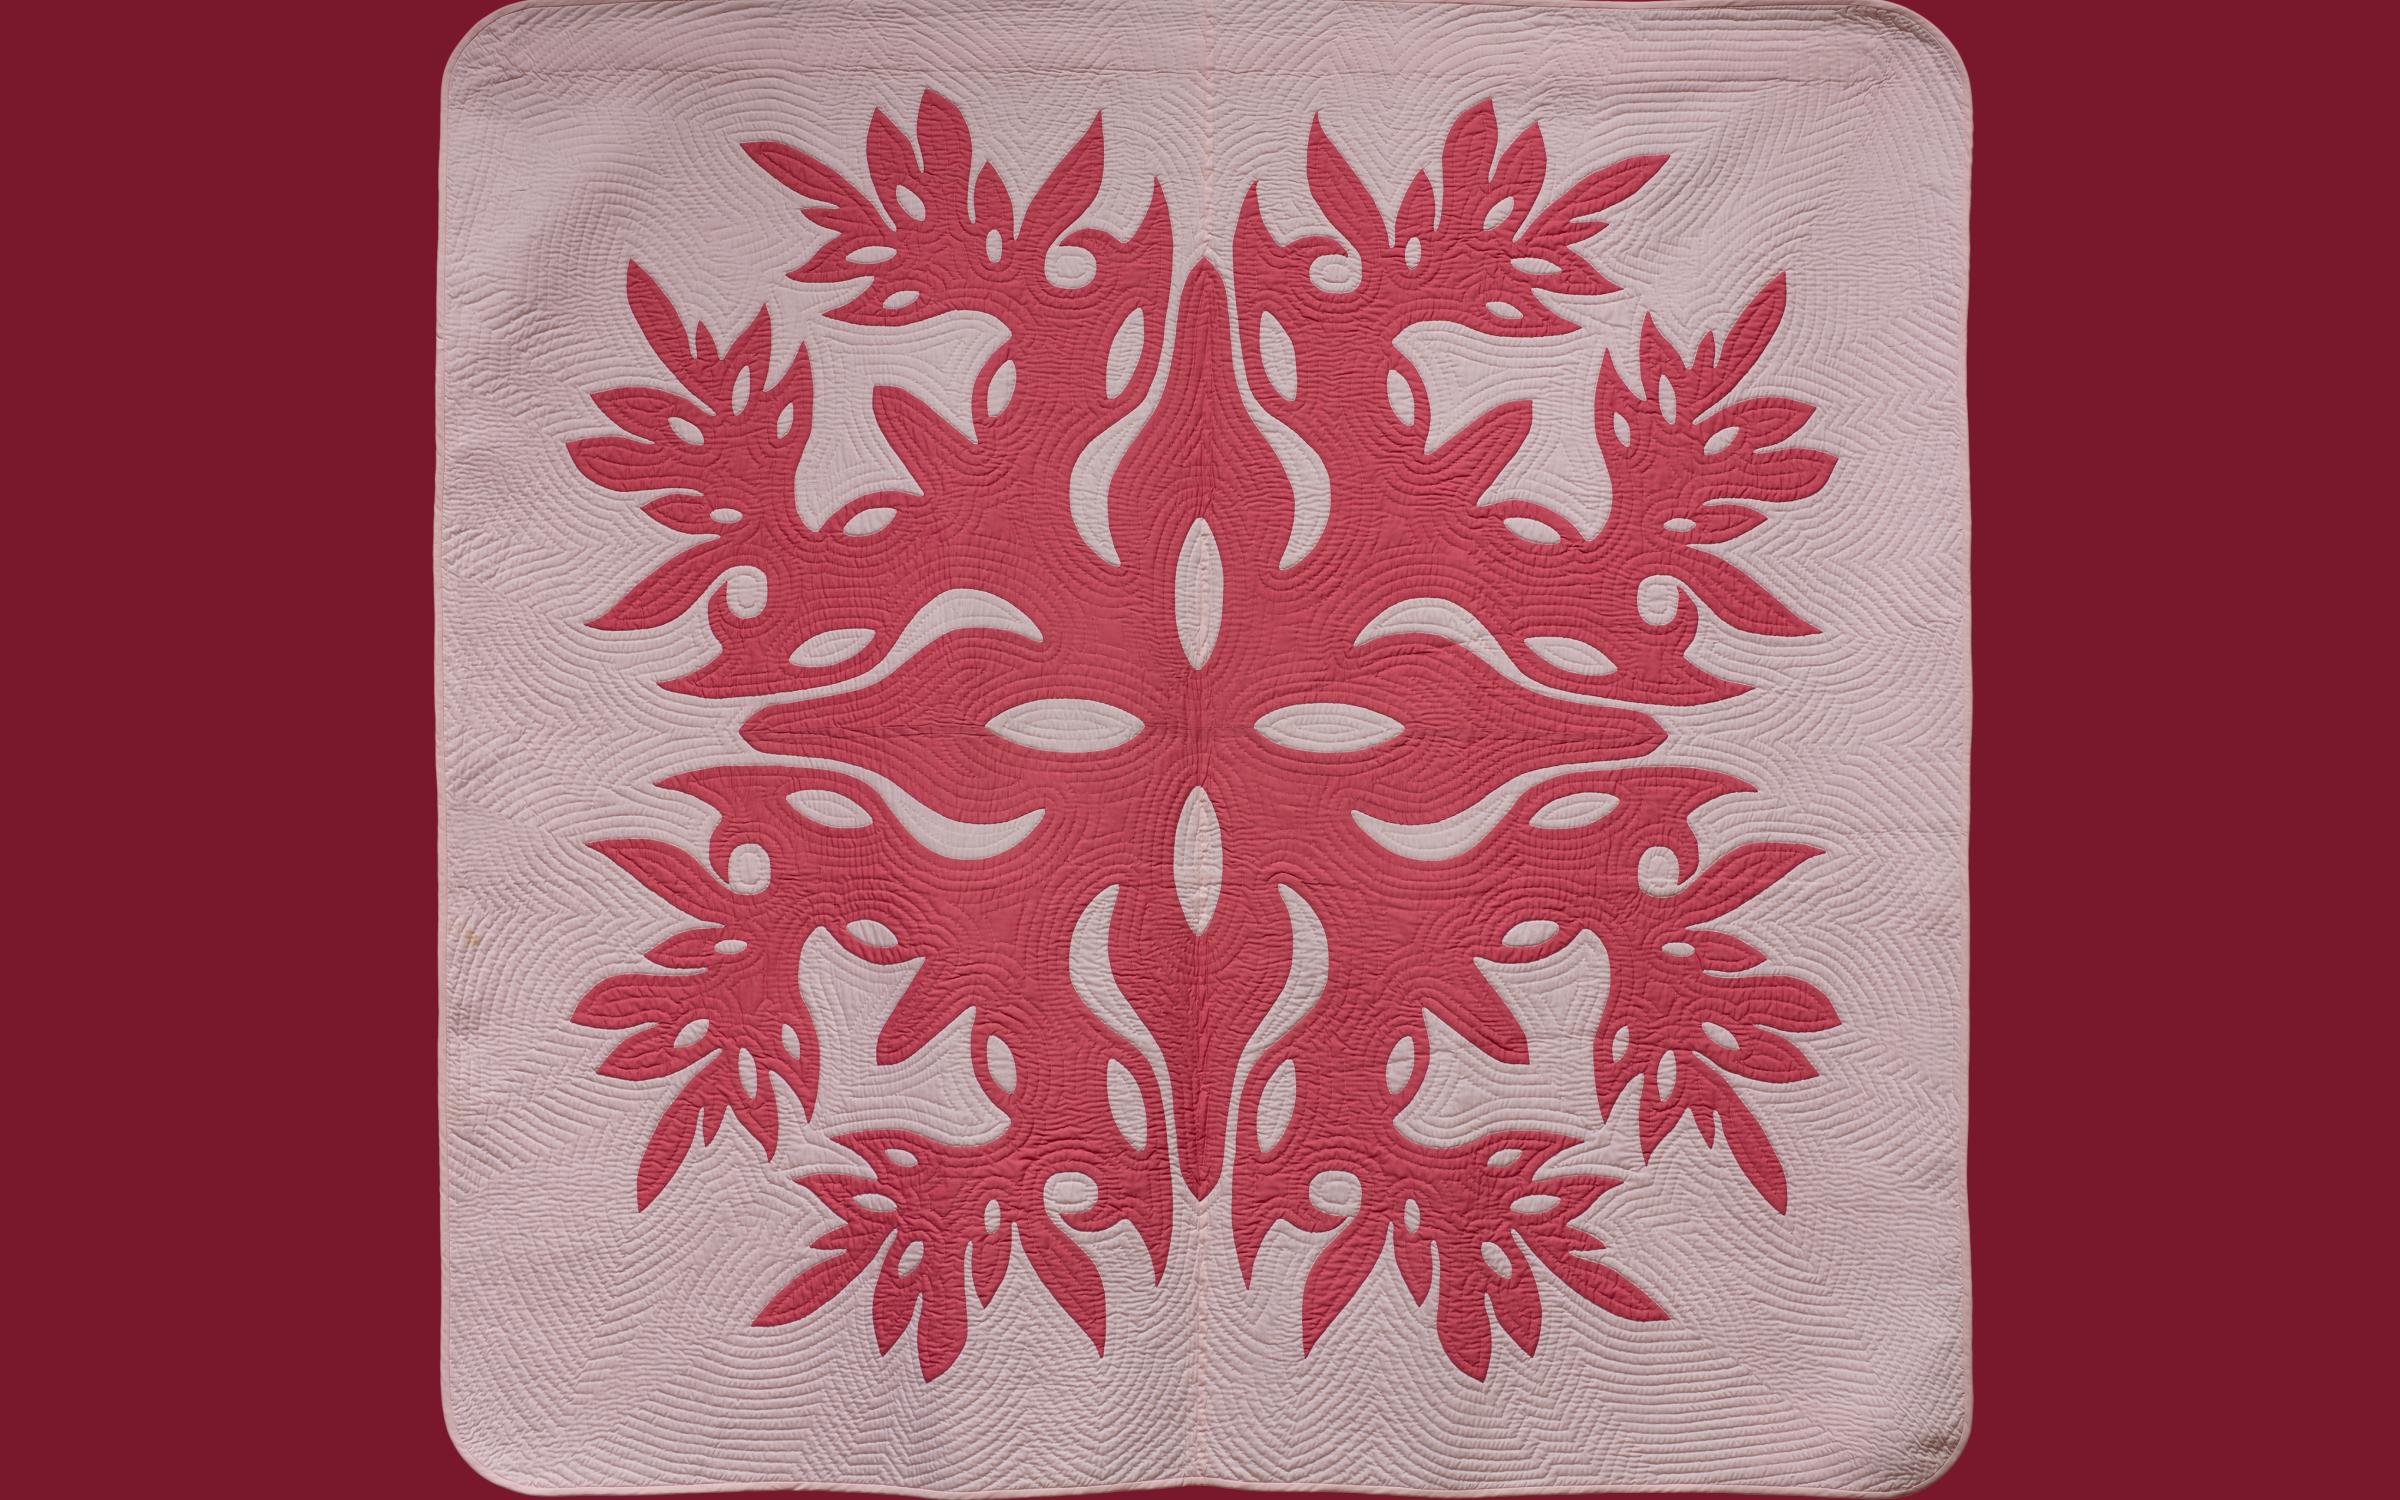 A large pink quilt with hot pink designs on a burgundy background.